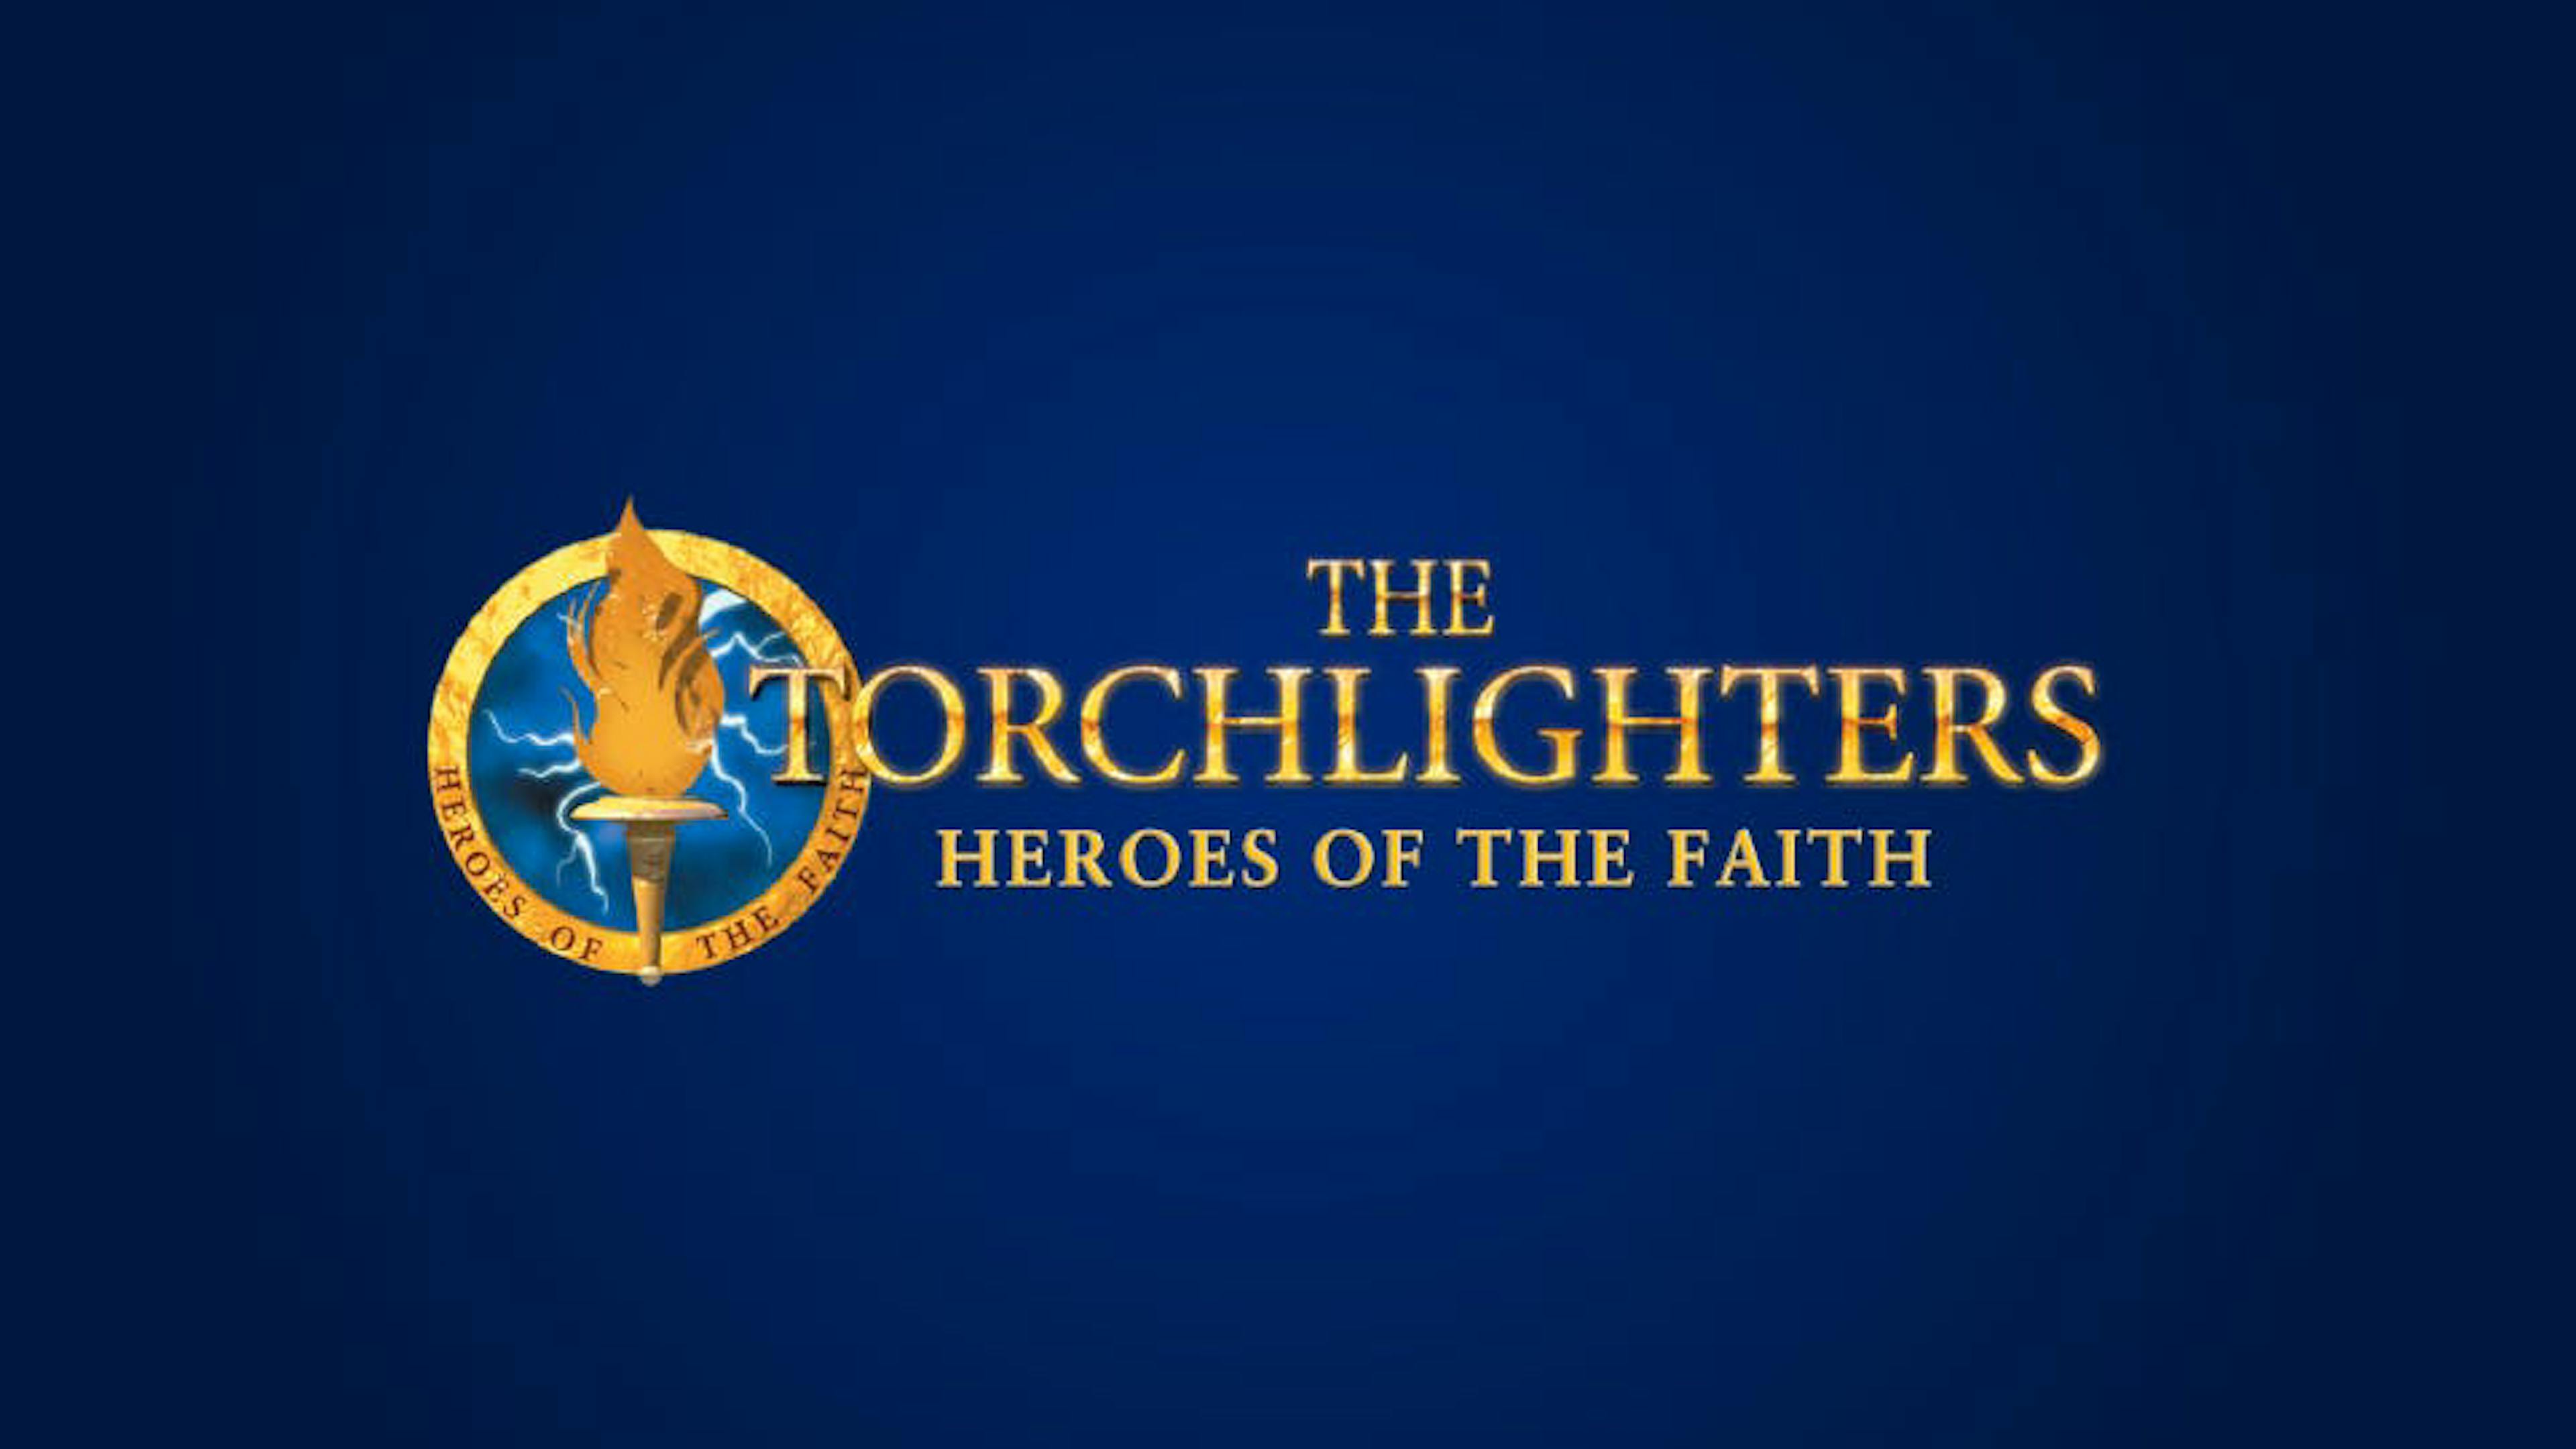 The Torchlighters - Heroes of the Faith